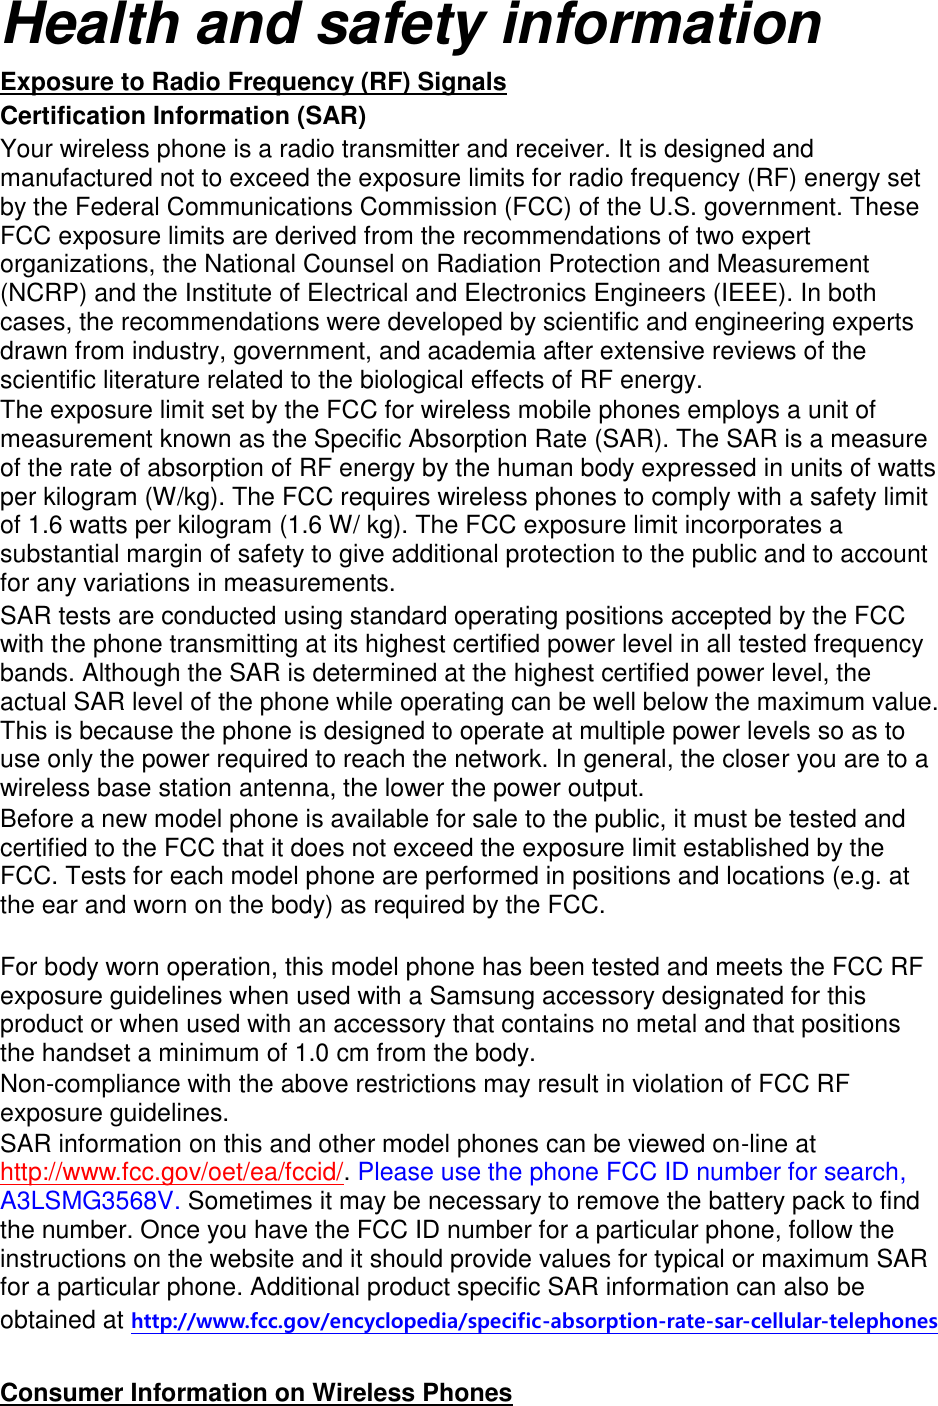 Health and safety information Exposure to Radio Frequency (RF) Signals Certification Information (SAR) Your wireless phone is a radio transmitter and receiver. It is designed and manufactured not to exceed the exposure limits for radio frequency (RF) energy set by the Federal Communications Commission (FCC) of the U.S. government. These FCC exposure limits are derived from the recommendations of two expert organizations, the National Counsel on Radiation Protection and Measurement (NCRP) and the Institute of Electrical and Electronics Engineers (IEEE). In both cases, the recommendations were developed by scientific and engineering experts drawn from industry, government, and academia after extensive reviews of the scientific literature related to the biological effects of RF energy. The exposure limit set by the FCC for wireless mobile phones employs a unit of measurement known as the Specific Absorption Rate (SAR). The SAR is a measure of the rate of absorption of RF energy by the human body expressed in units of watts per kilogram (W/kg). The FCC requires wireless phones to comply with a safety limit of 1.6 watts per kilogram (1.6 W/ kg). The FCC exposure limit incorporates a substantial margin of safety to give additional protection to the public and to account for any variations in measurements. SAR tests are conducted using standard operating positions accepted by the FCC with the phone transmitting at its highest certified power level in all tested frequency bands. Although the SAR is determined at the highest certified power level, the actual SAR level of the phone while operating can be well below the maximum value. This is because the phone is designed to operate at multiple power levels so as to use only the power required to reach the network. In general, the closer you are to a wireless base station antenna, the lower the power output. Before a new model phone is available for sale to the public, it must be tested and certified to the FCC that it does not exceed the exposure limit established by the FCC. Tests for each model phone are performed in positions and locations (e.g. at the ear and worn on the body) as required by the FCC.      For body worn operation, this model phone has been tested and meets the FCC RF exposure guidelines when used with a Samsung accessory designated for this product or when used with an accessory that contains no metal and that positions the handset a minimum of 1.0 cm from the body.   Non-compliance with the above restrictions may result in violation of FCC RF exposure guidelines. SAR information on this and other model phones can be viewed on-line at http://www.fcc.gov/oet/ea/fccid/. Please use the phone FCC ID number for search, A3LSMG3568V. Sometimes it may be necessary to remove the battery pack to find the number. Once you have the FCC ID number for a particular phone, follow the instructions on the website and it should provide values for typical or maximum SAR for a particular phone. Additional product specific SAR information can also be obtained at http://www.fcc.gov/encyclopedia/specific-absorption-rate-sar-cellular-telephones  Consumer Information on Wireless Phones 